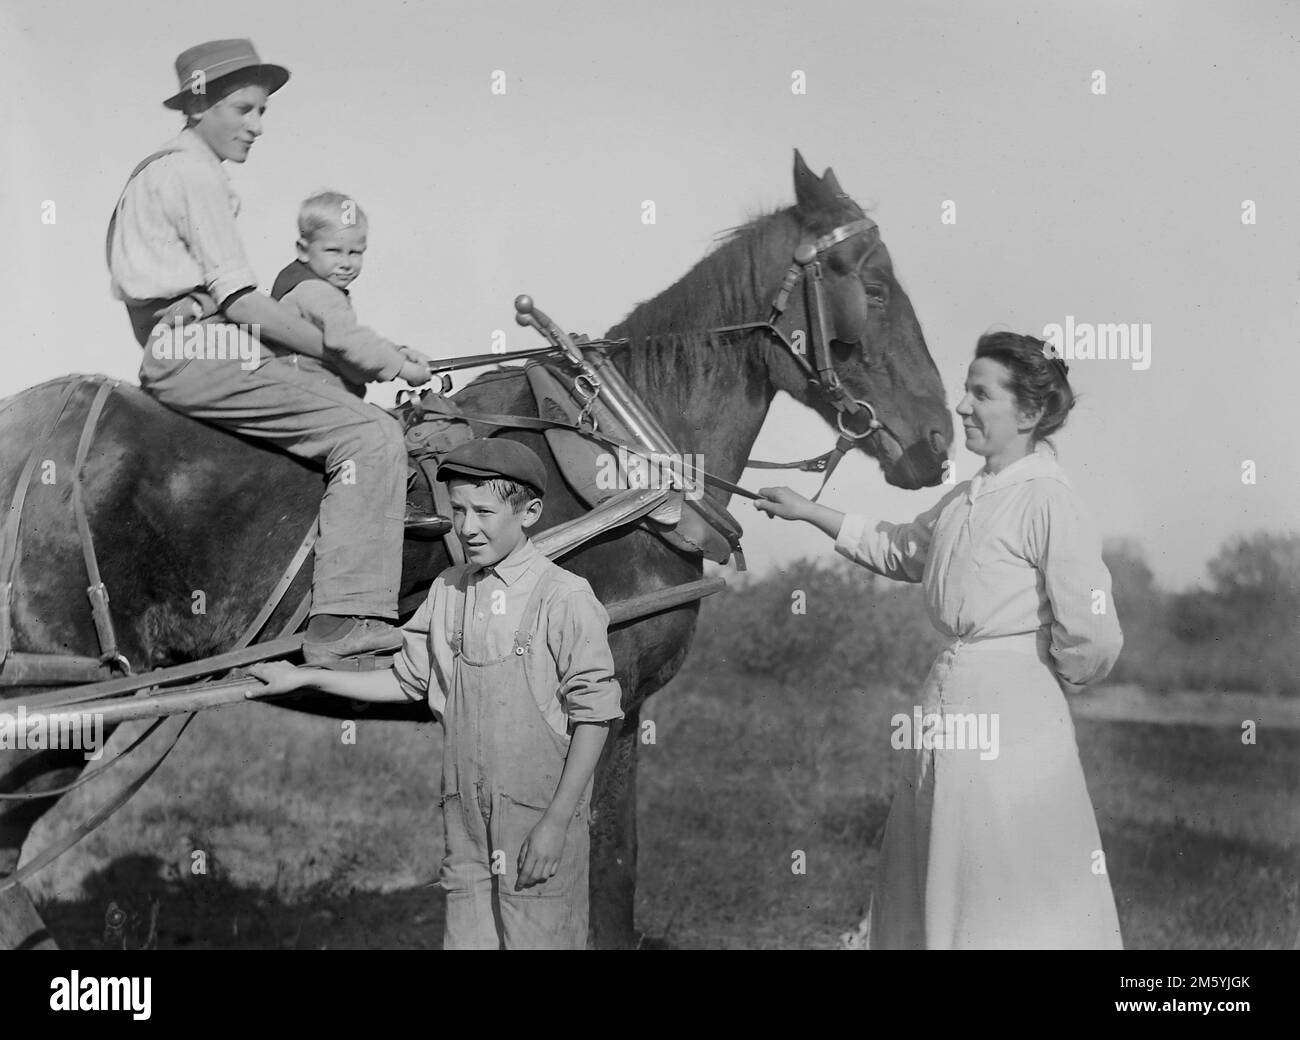 Mom and the children pose with the plow horse on the farm, ca. 1910, Stock Photo